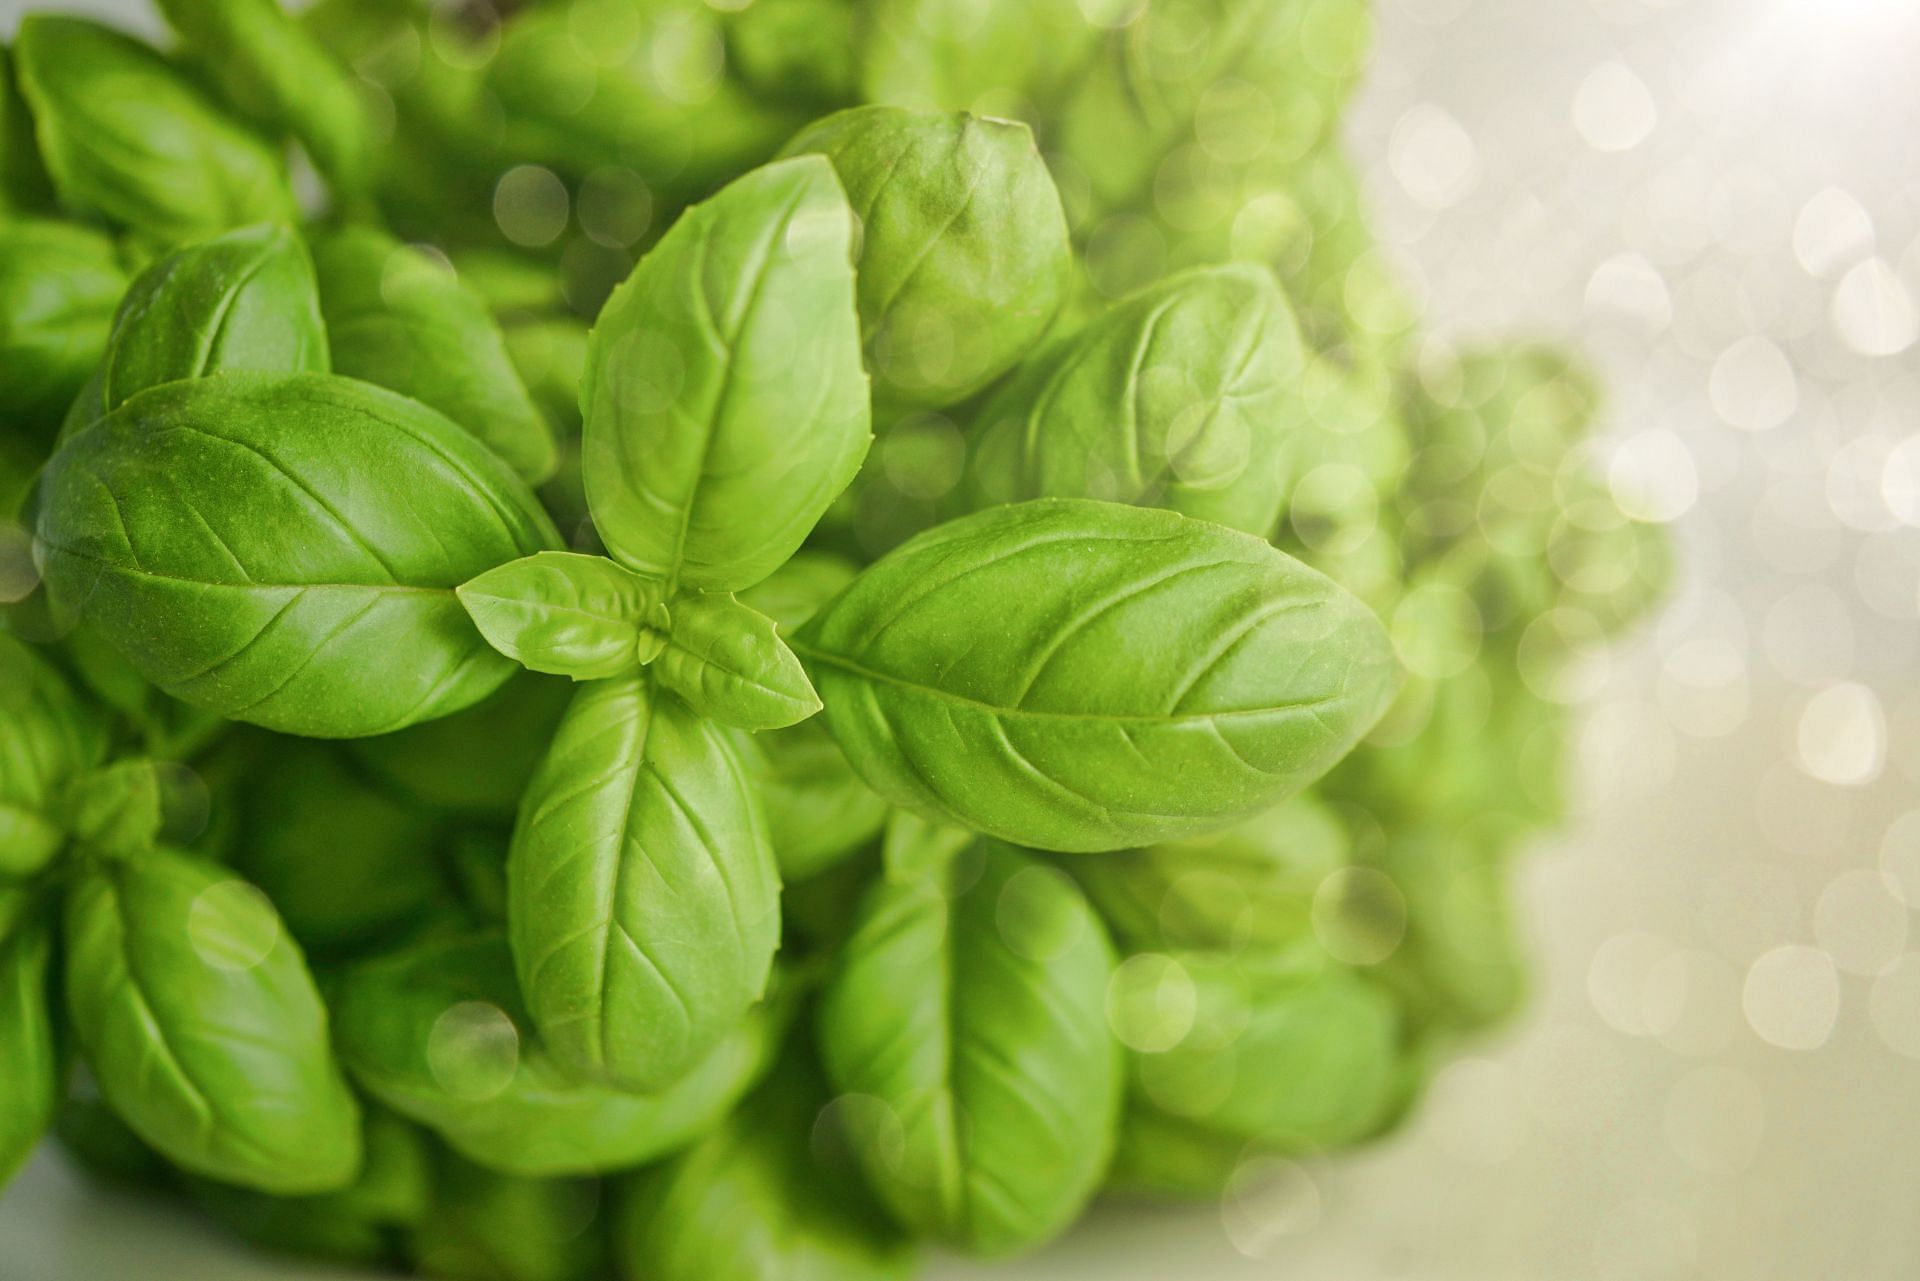 Basil is a miraculous herb that has been used in age-old remedies for indigestion, cold and cough, sore throats, etc. (Image via Pexels @Monicore)